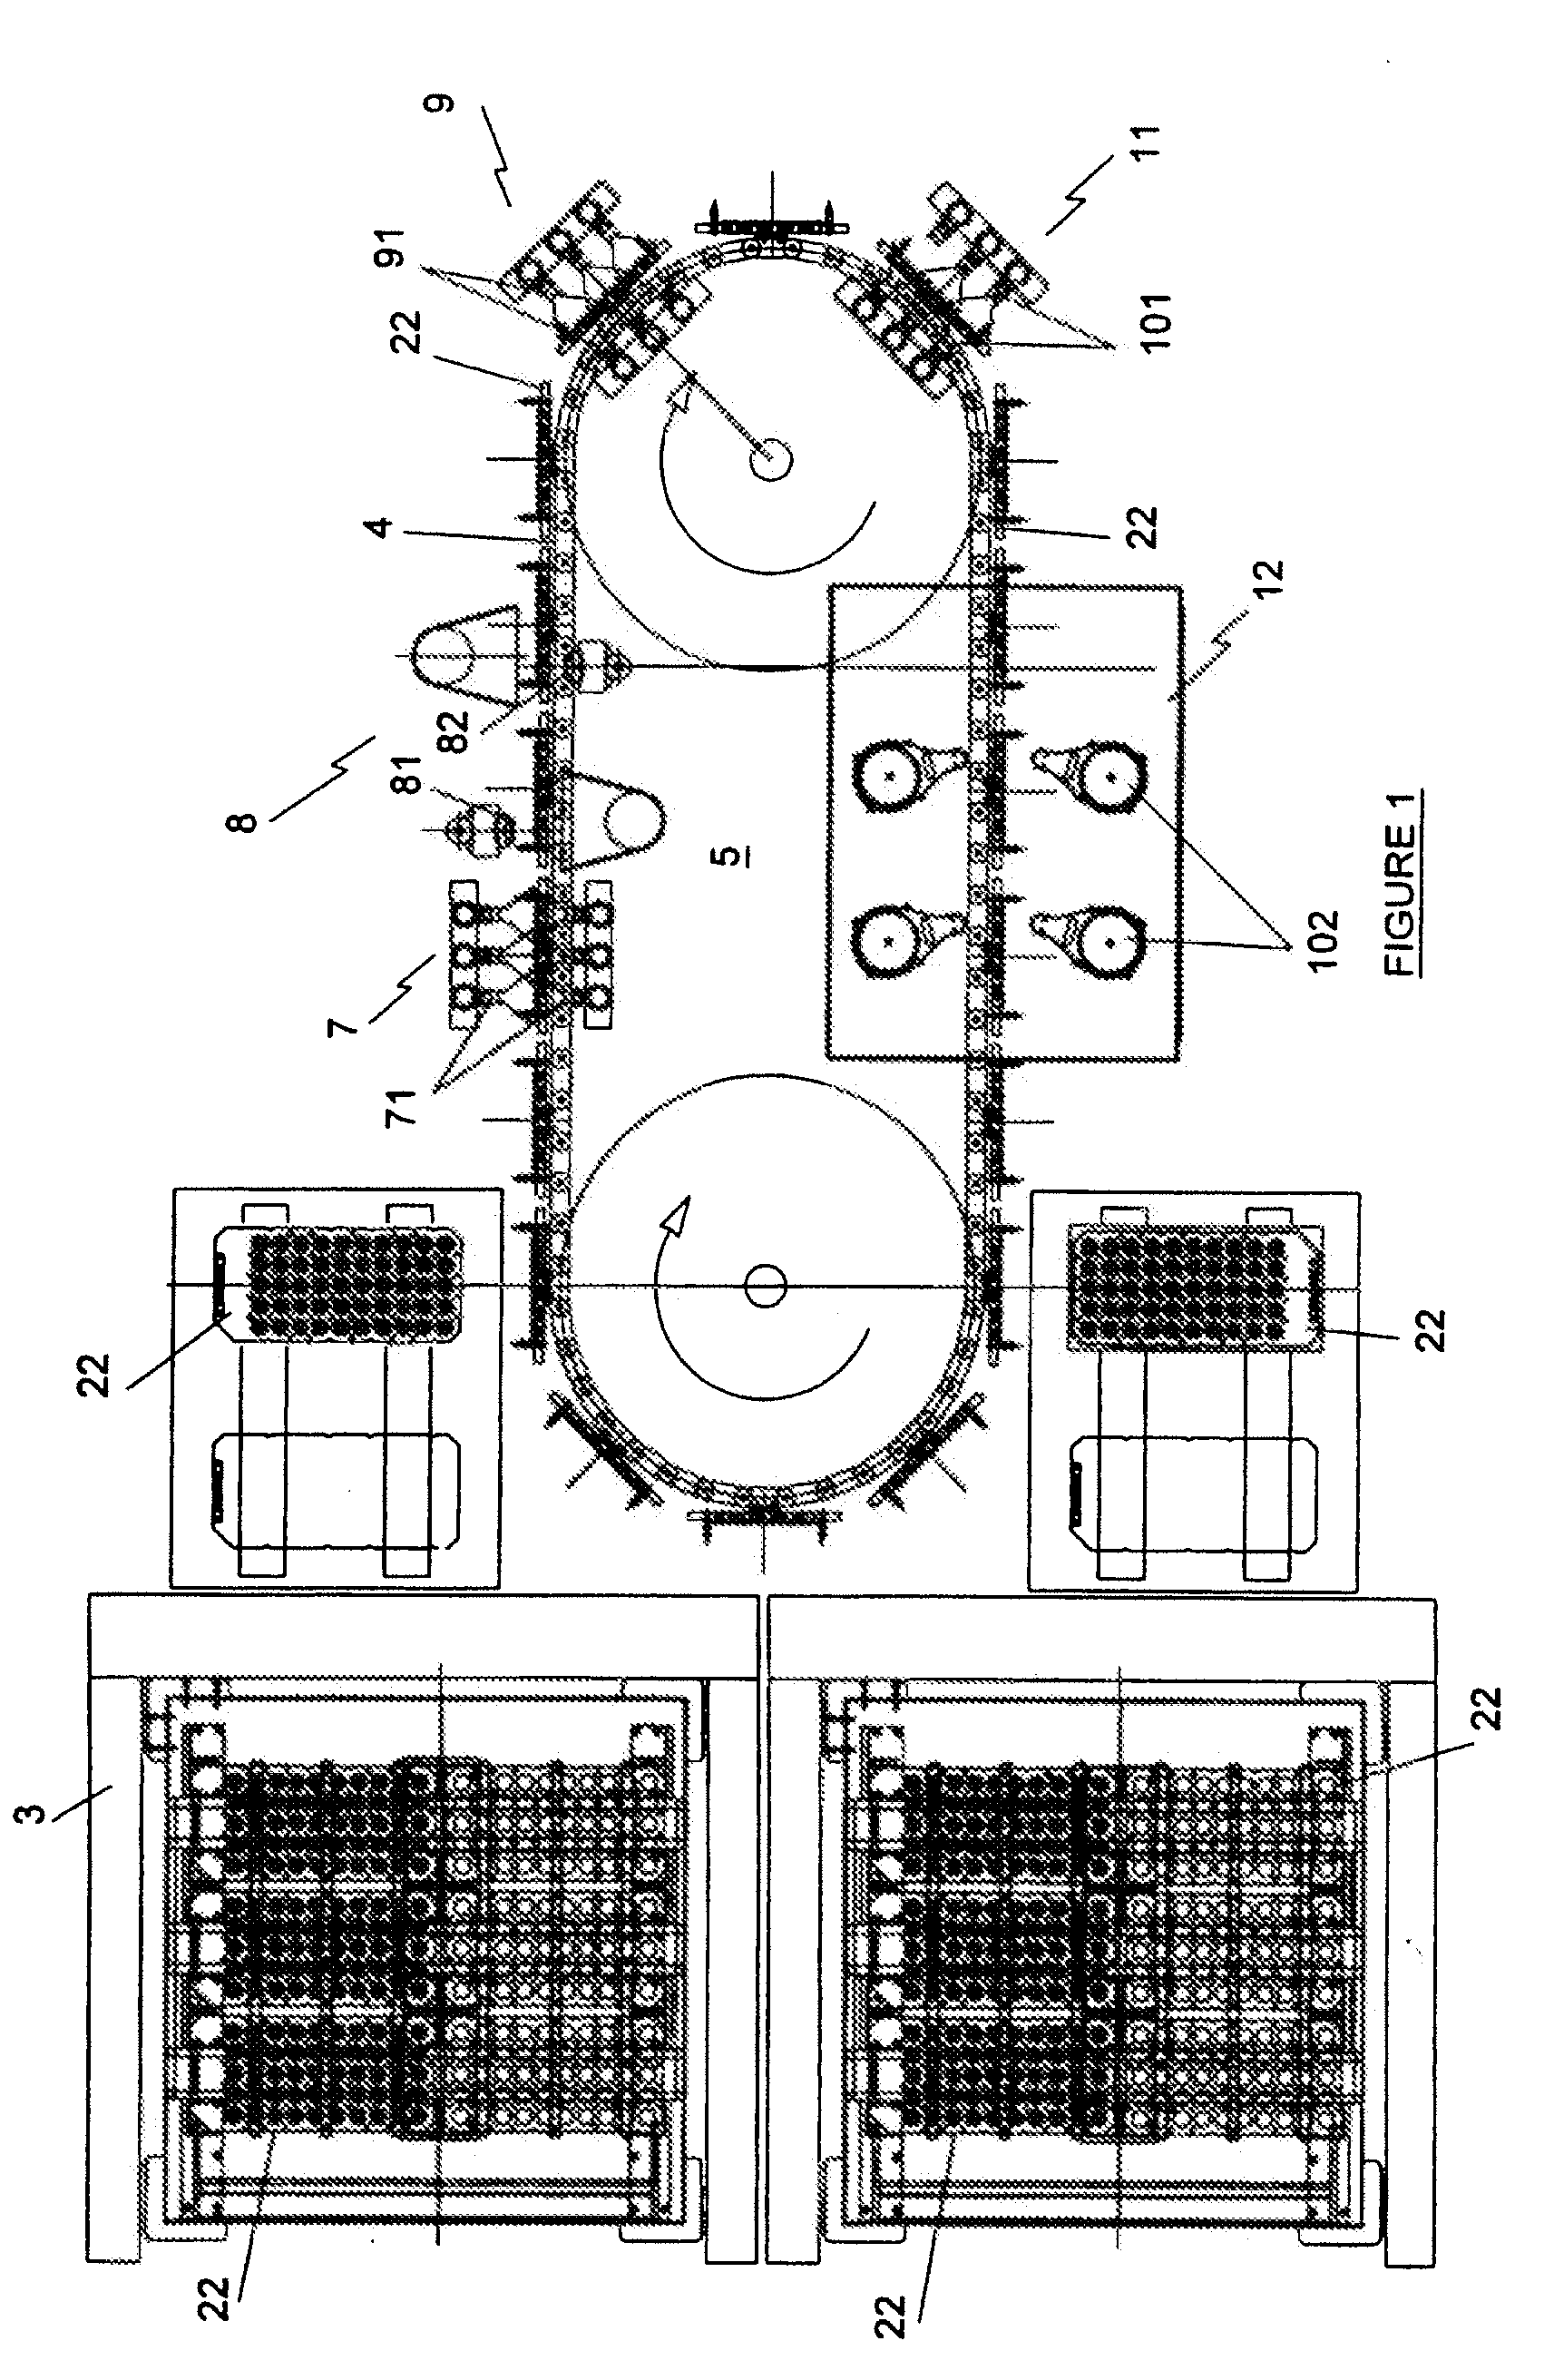 System and Method for Cleaning Process Trays